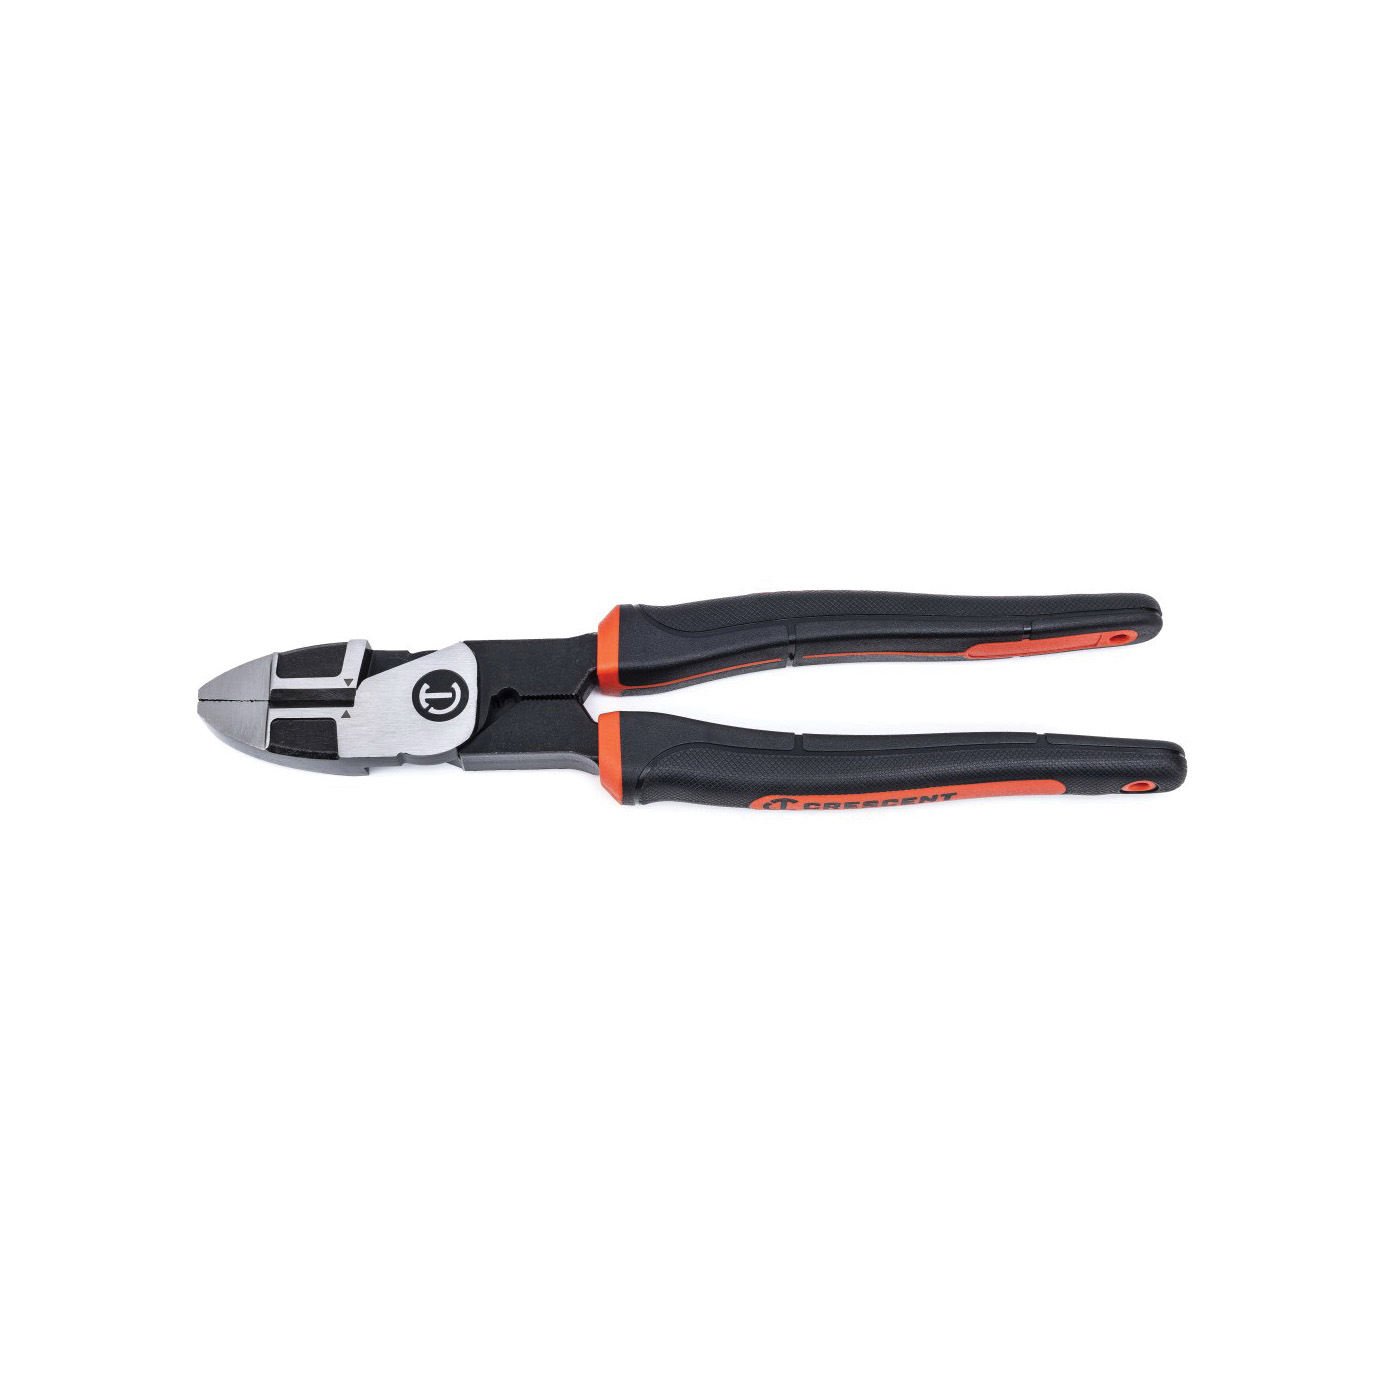 Crescent Z2 K9 Series Z20508CG Lineman's Plier, 8.9 in OAL, 6 AWG Cutting Capacity, 1-1/2 in Jaw Opening, 0.28 in W Jaw